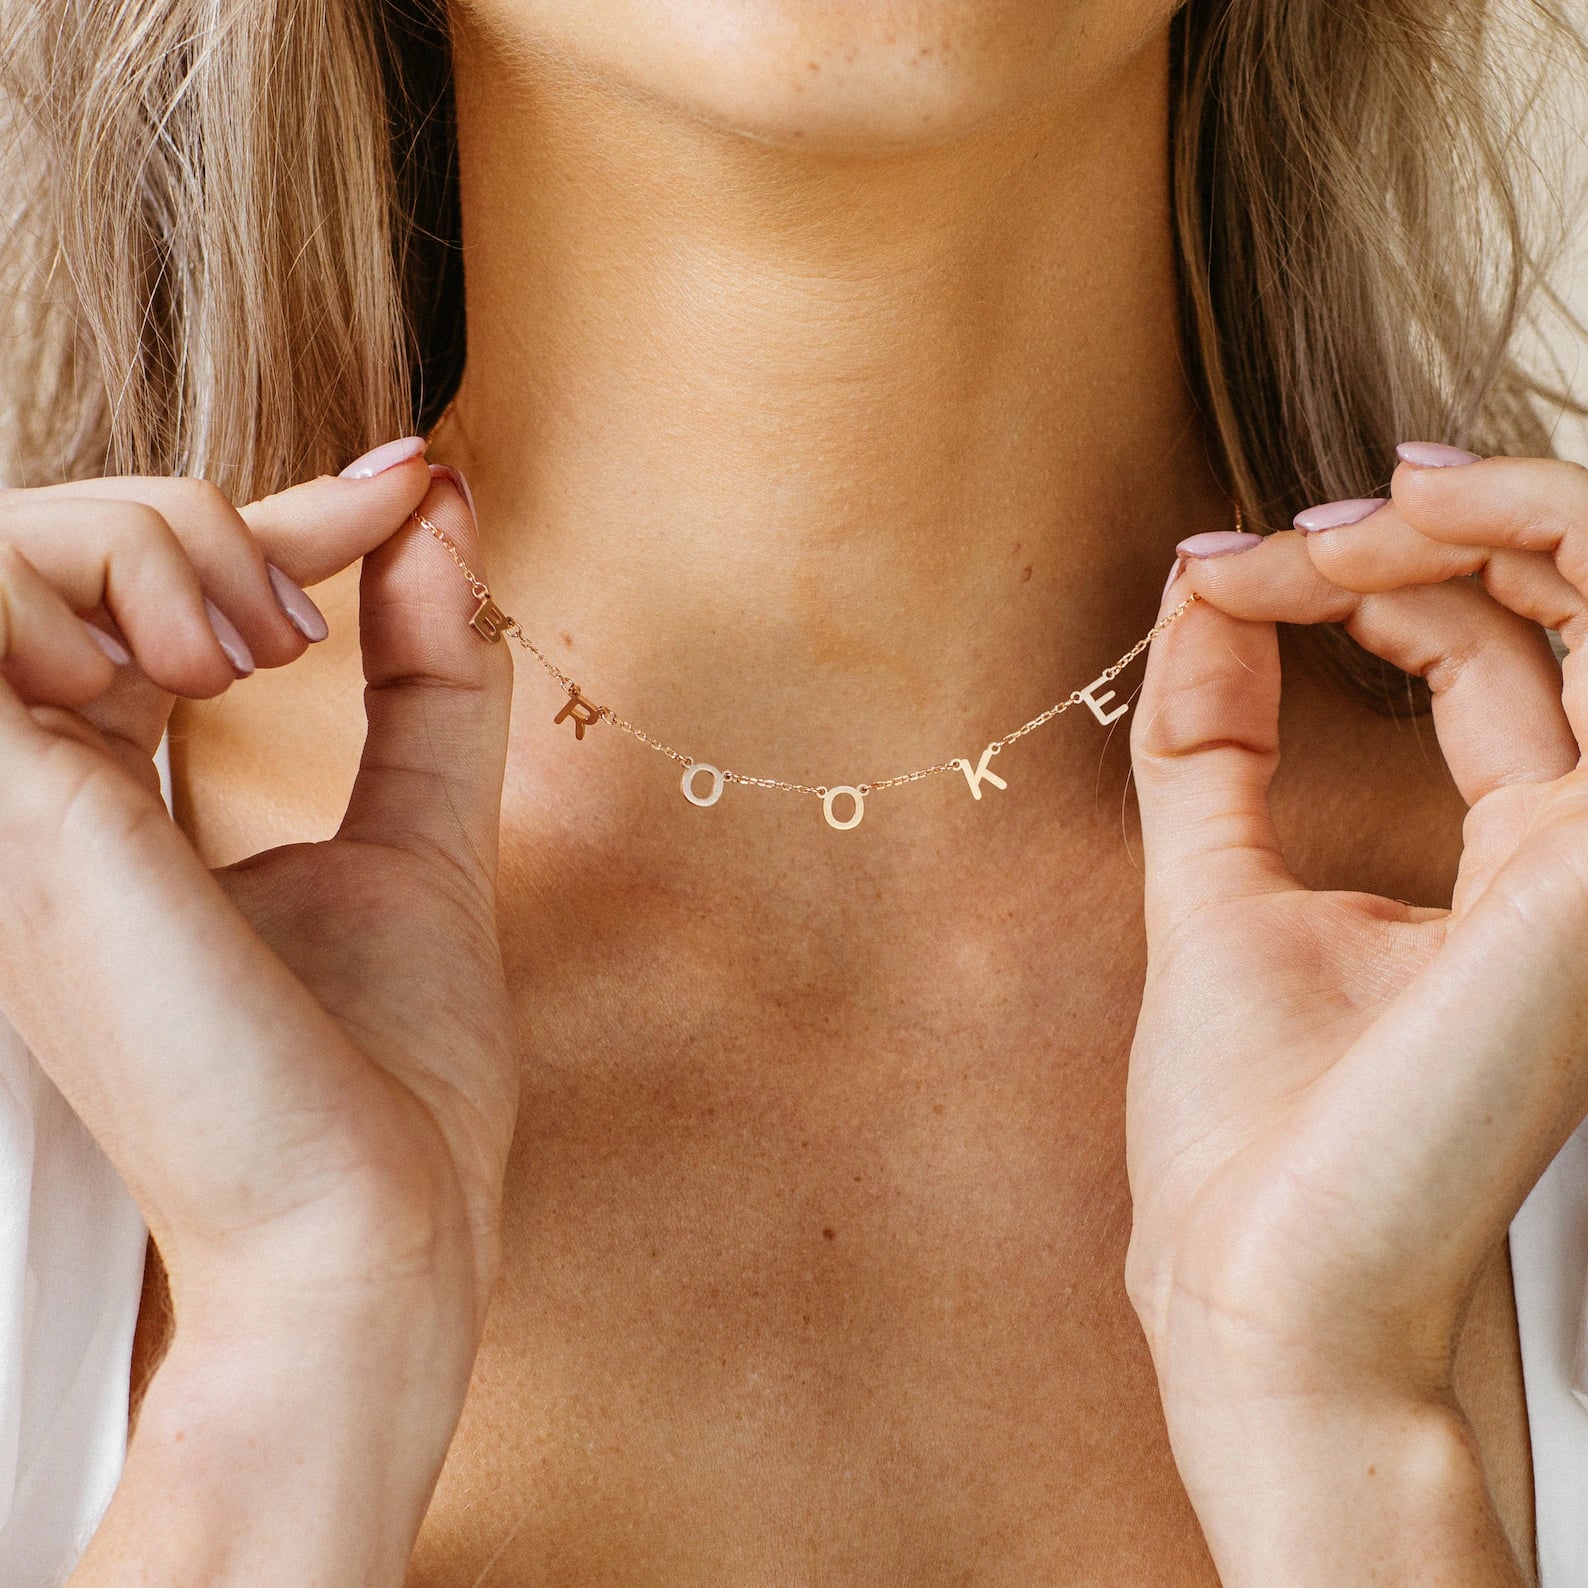 10 Classy Minimalist Outfit Ideas With Gold Chain Necklaces